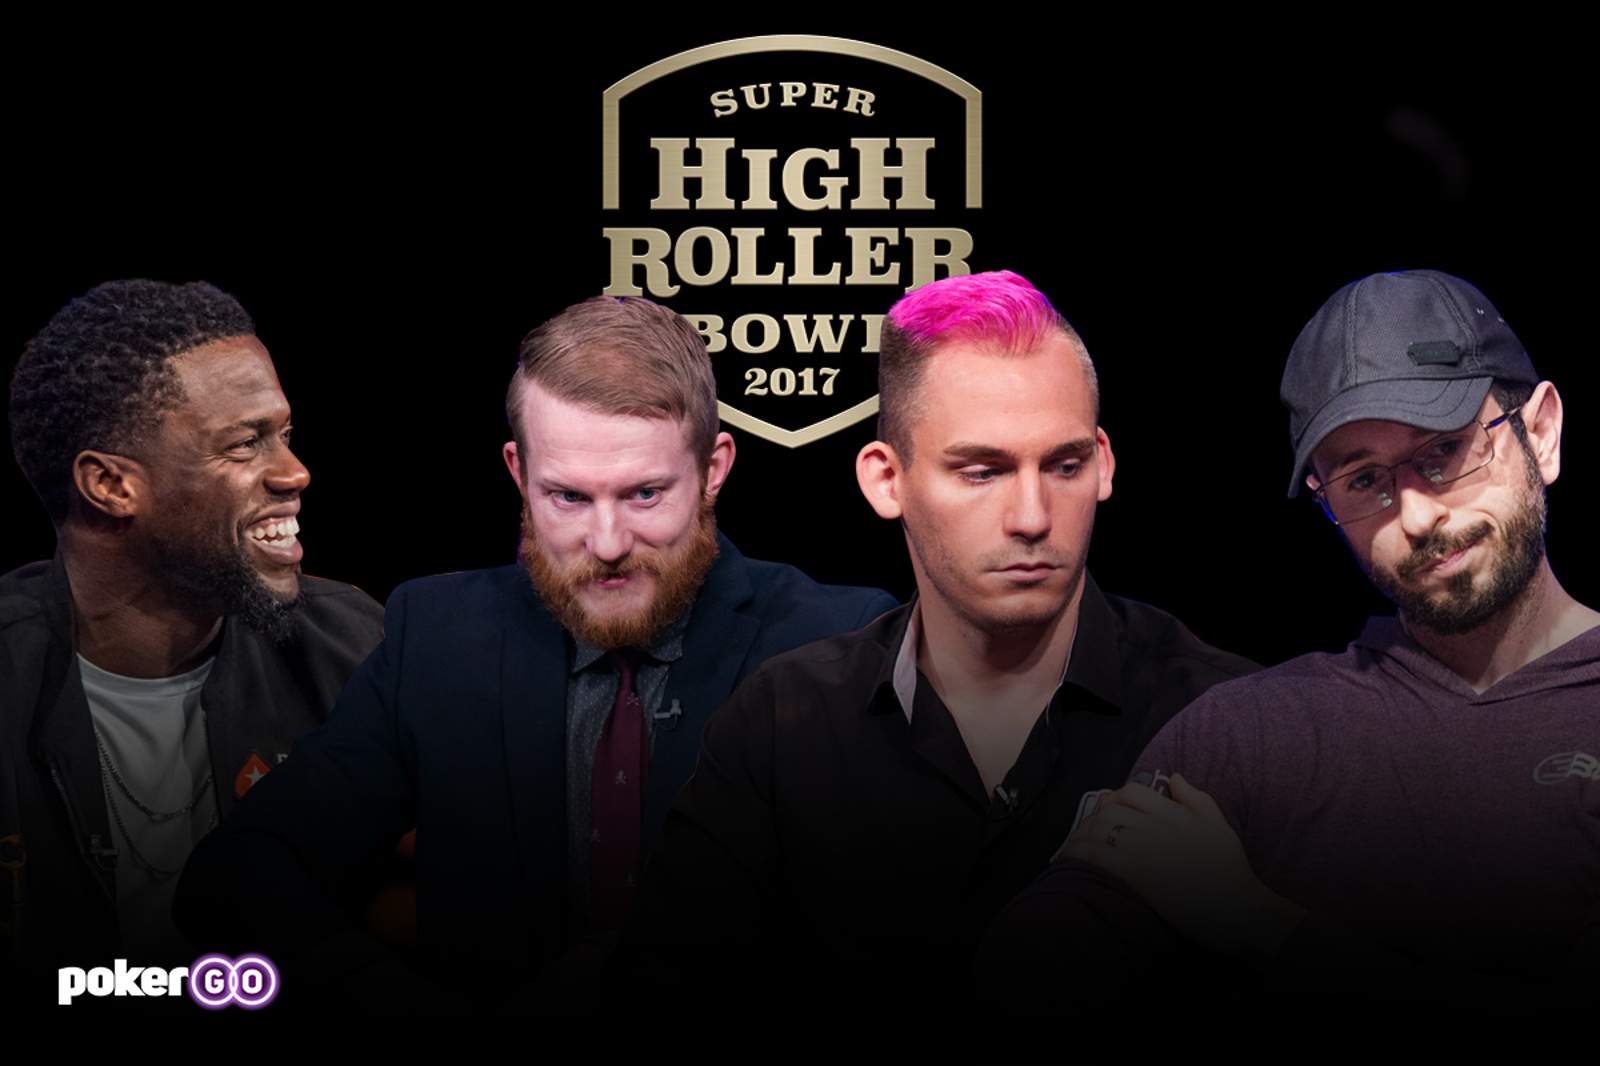 Justin Bonomo Leads The Charge on Day 2 of Super High Roller Bowl 2017